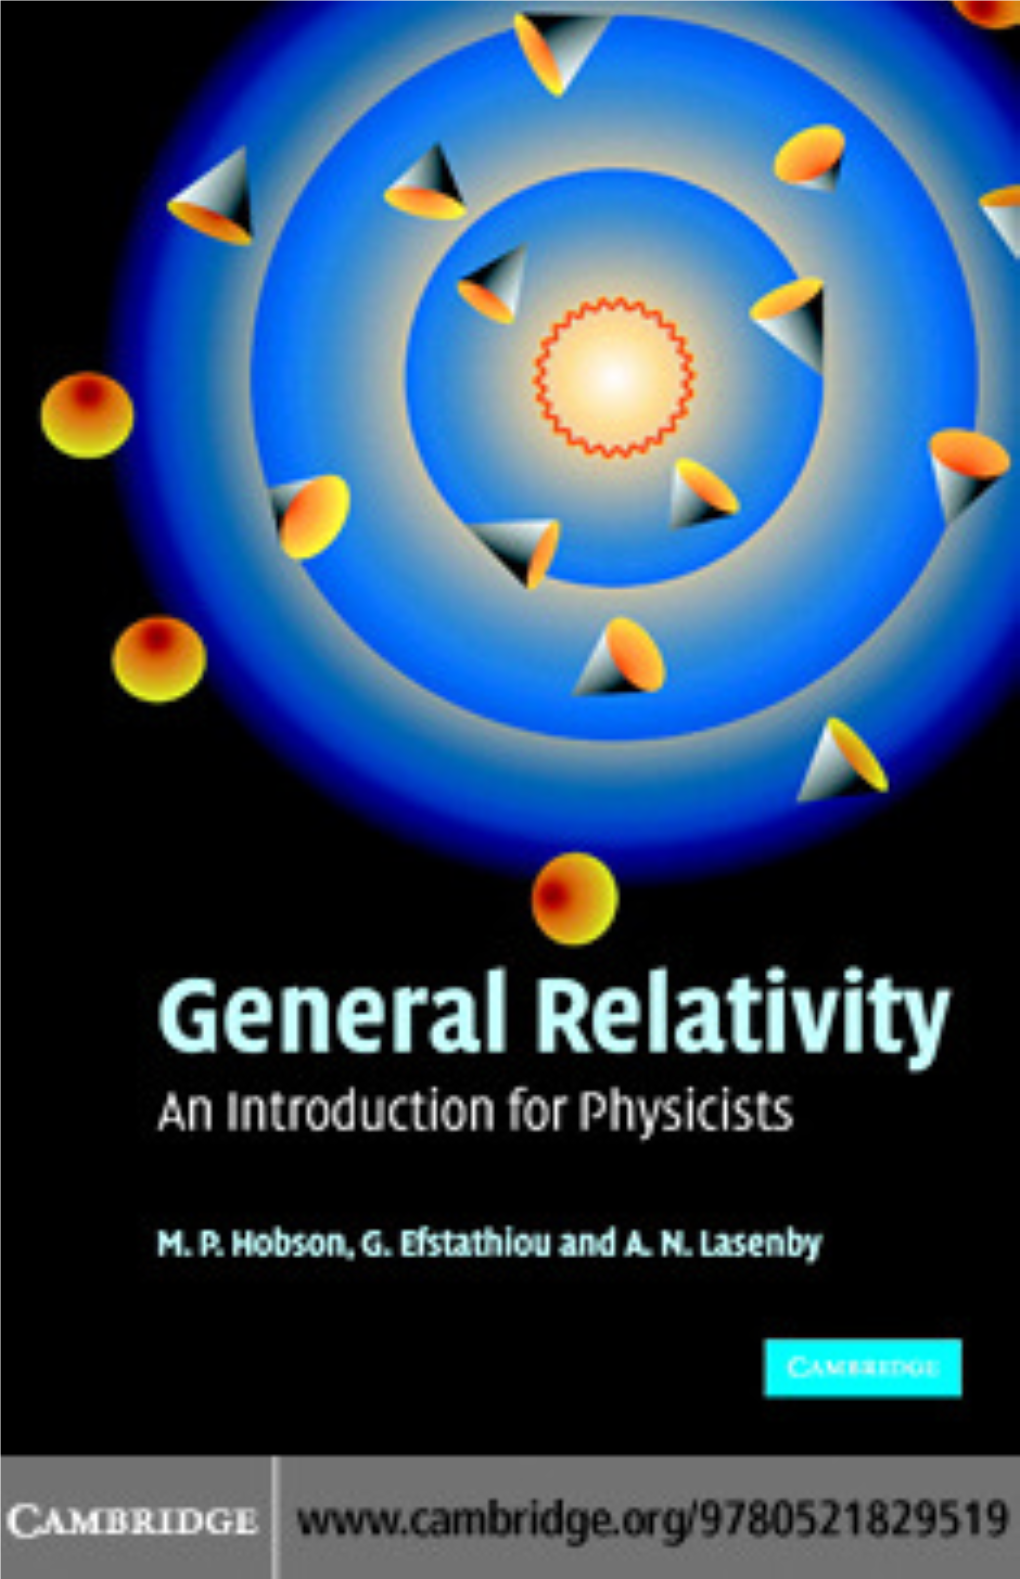 General Relativity: an Introduction for Physicists Provides a Clear Mathematical Introduction to Einstein’S Theory of General Relativity